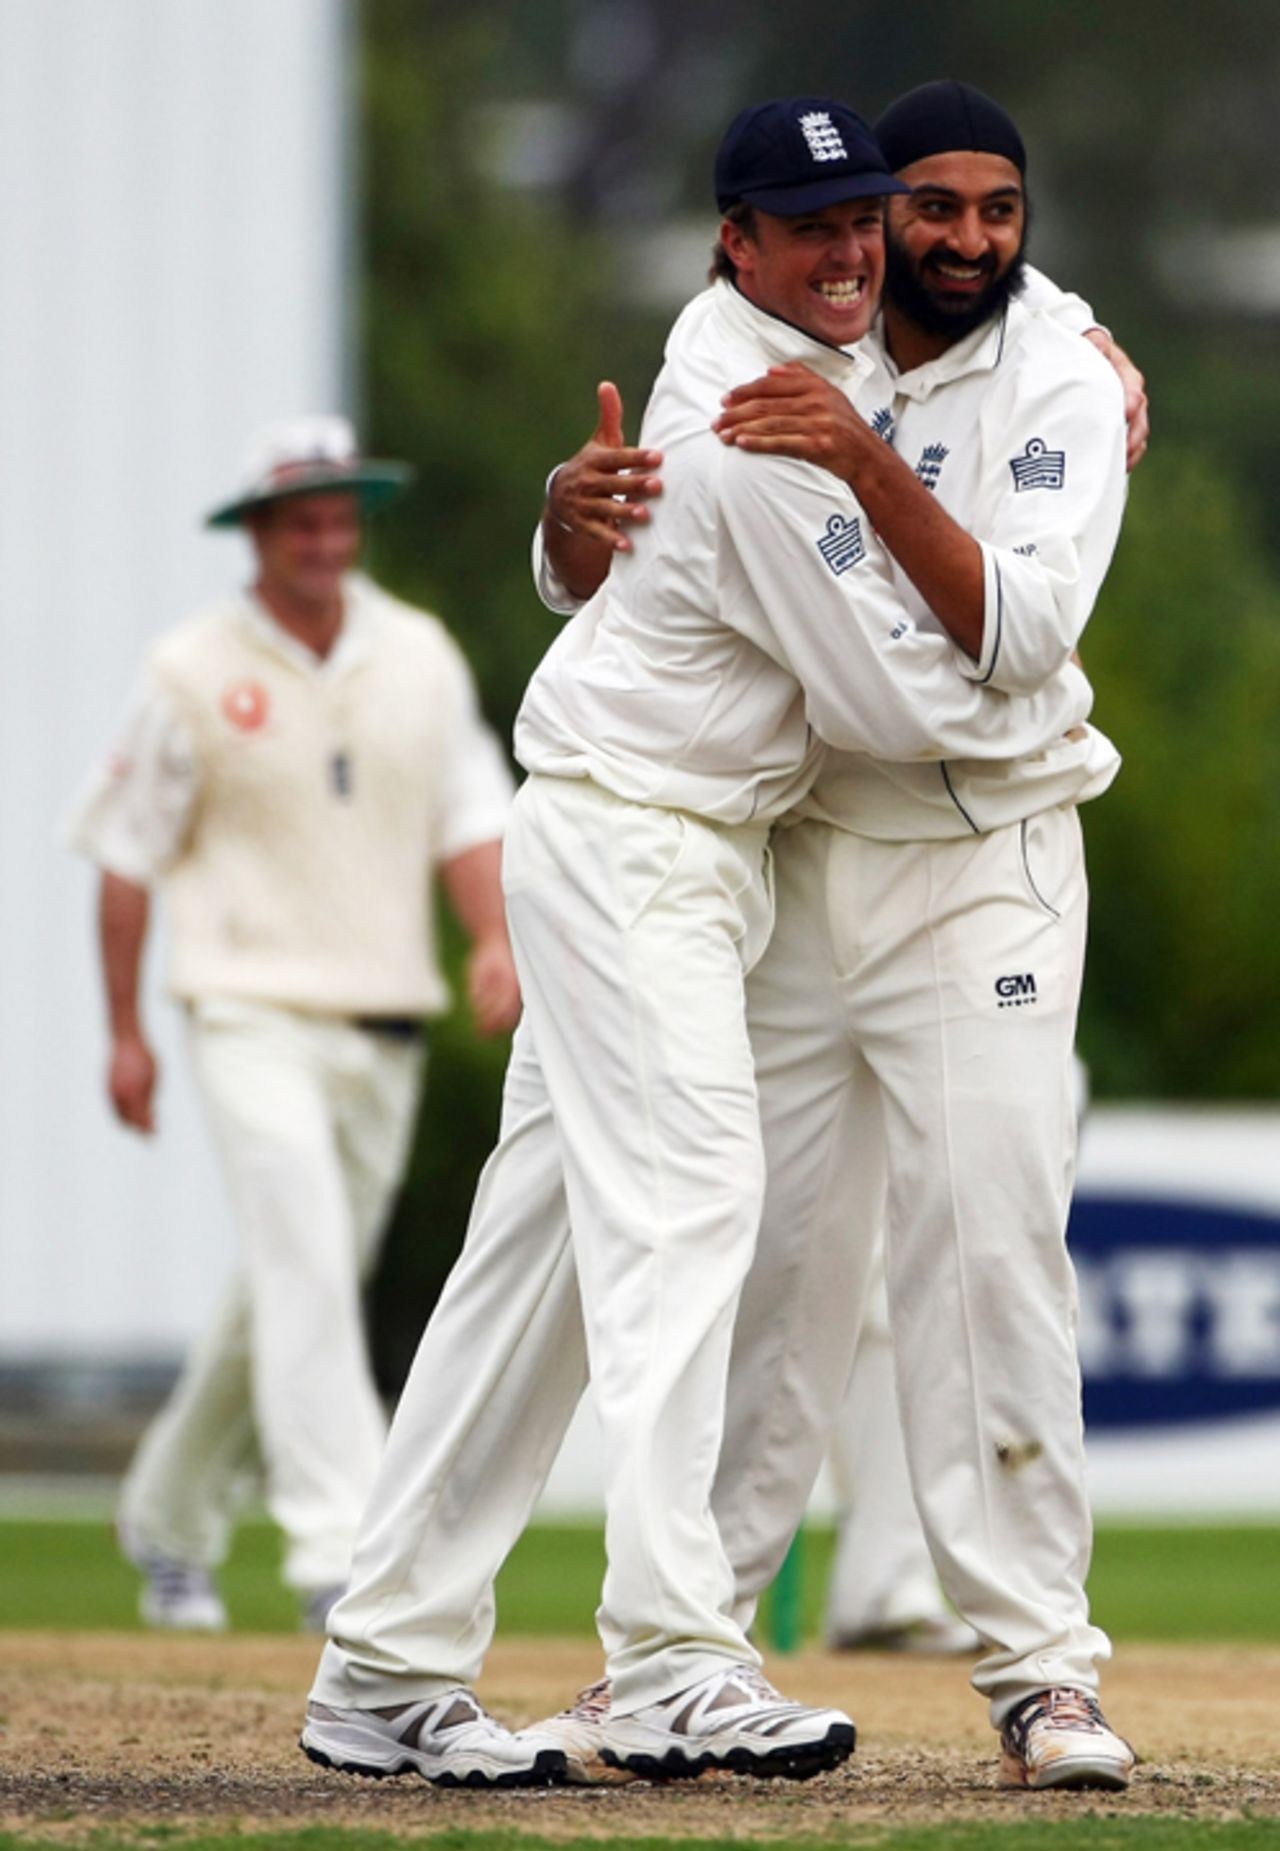 Graeme Swann is delighted with Monty Panesar's after the latter claimed a wicket , New Zealand Select XI v England XI, three-day tour match, Dunedin, 2nd day, February 29, 2008 

